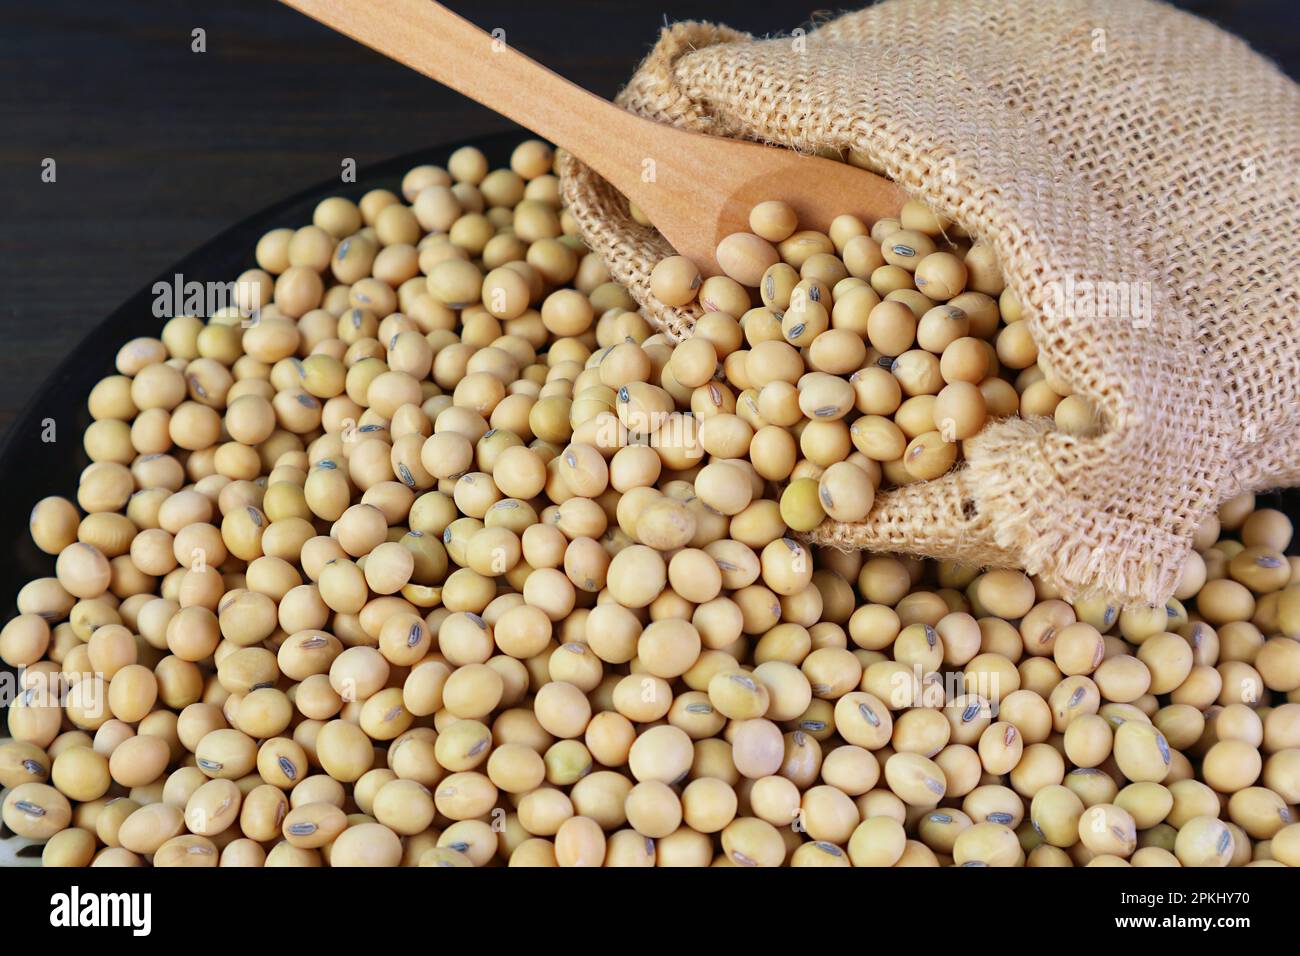 Dried Soybeans Scattered from Burlap Bag on to Black Wooden Table Stock Photo